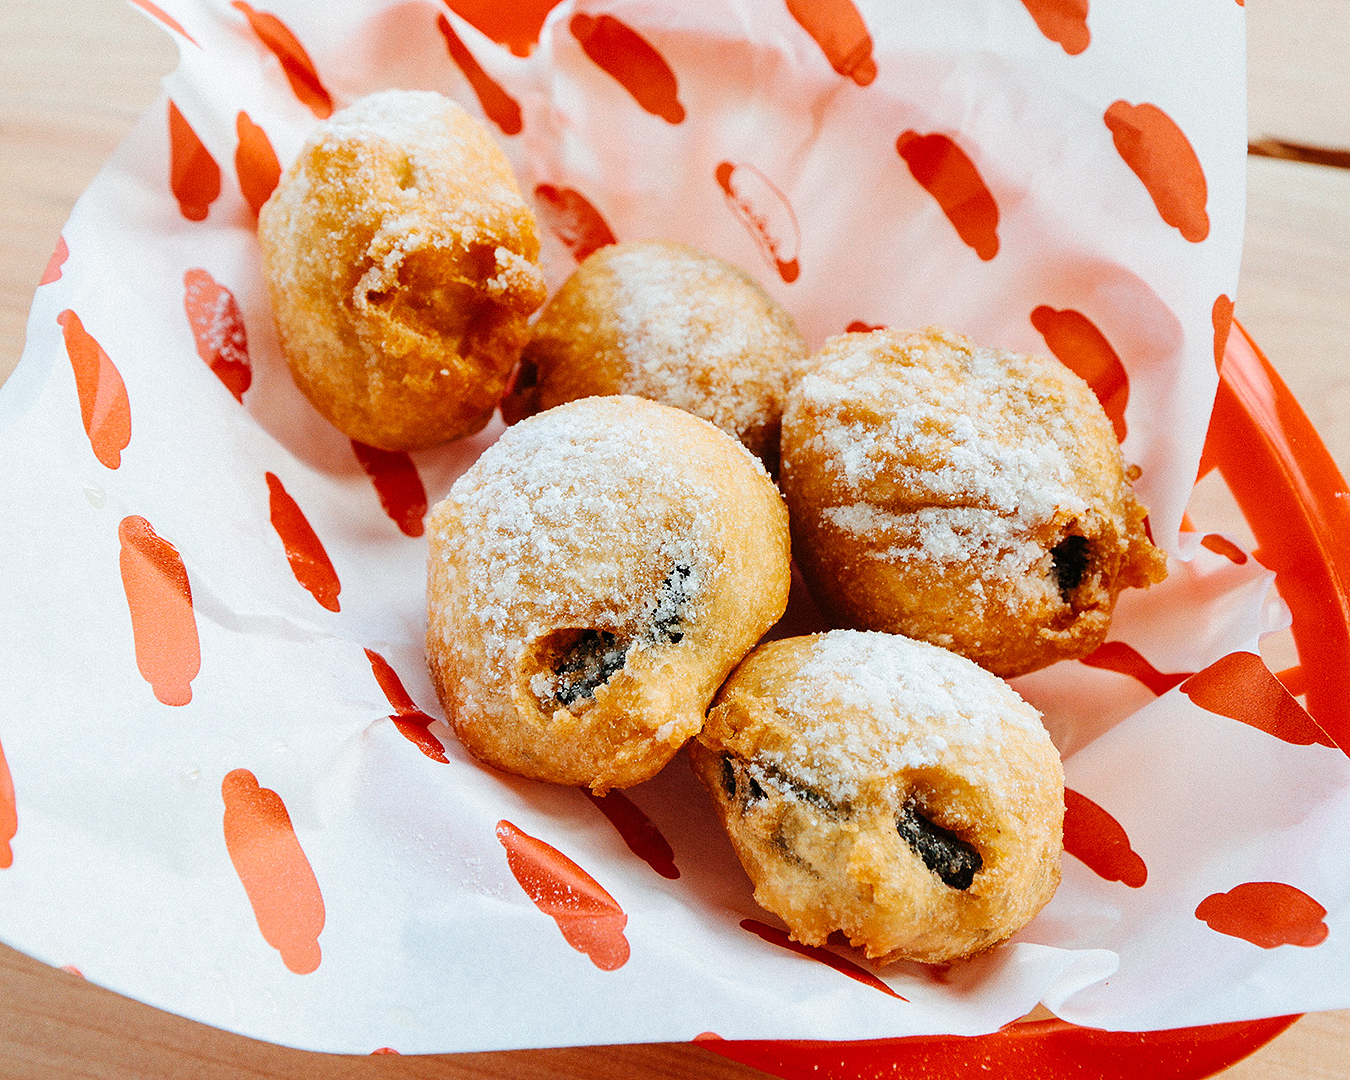 The wickedly delicious deep fried oreos at Good Dog Bad Dog